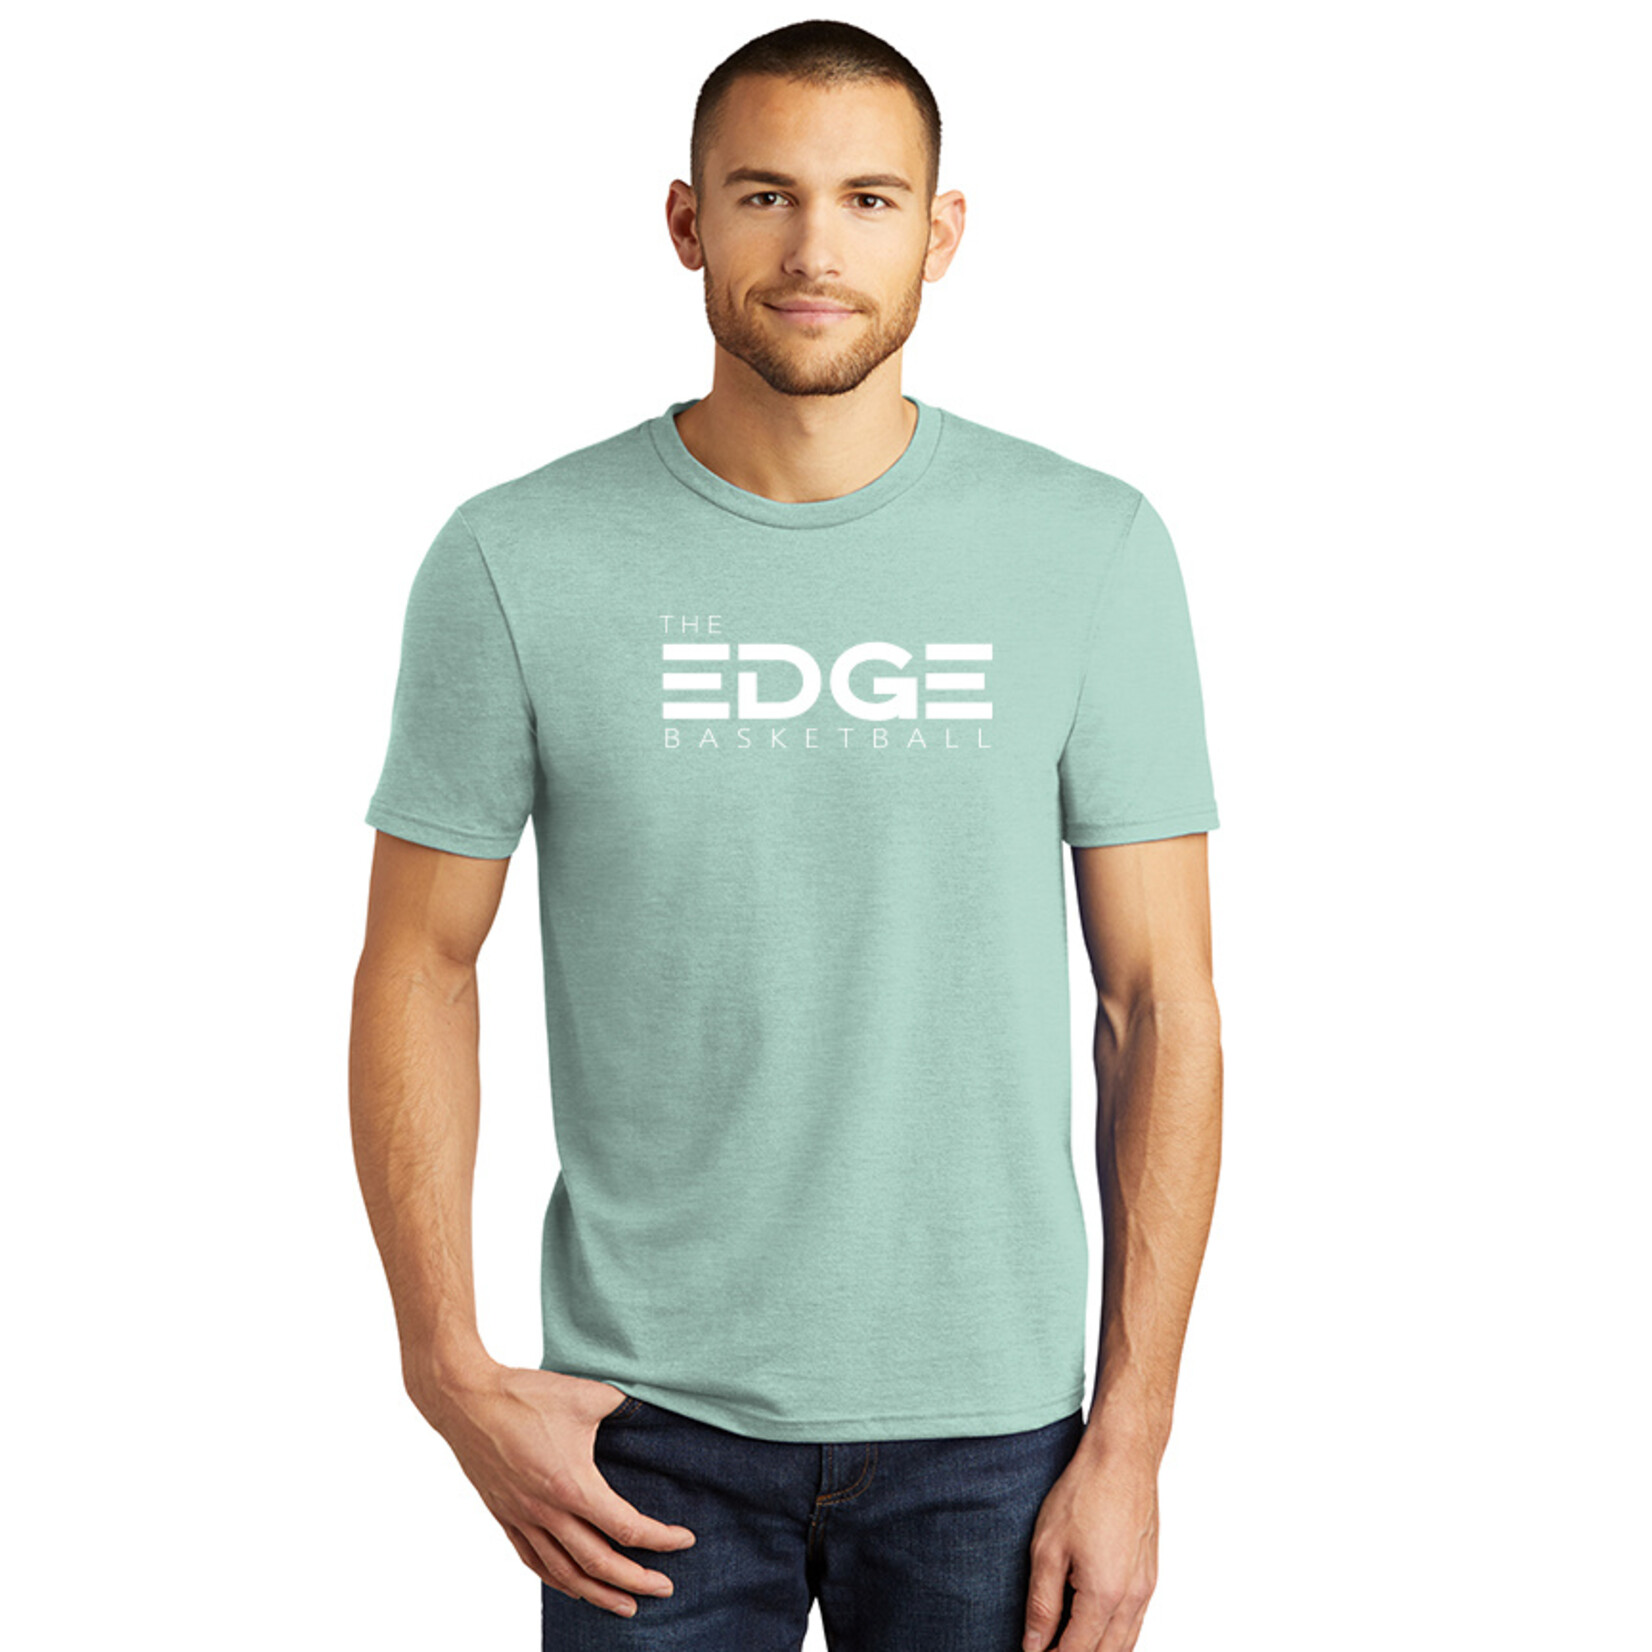 THE EDGE Adult Triblend T-shirt